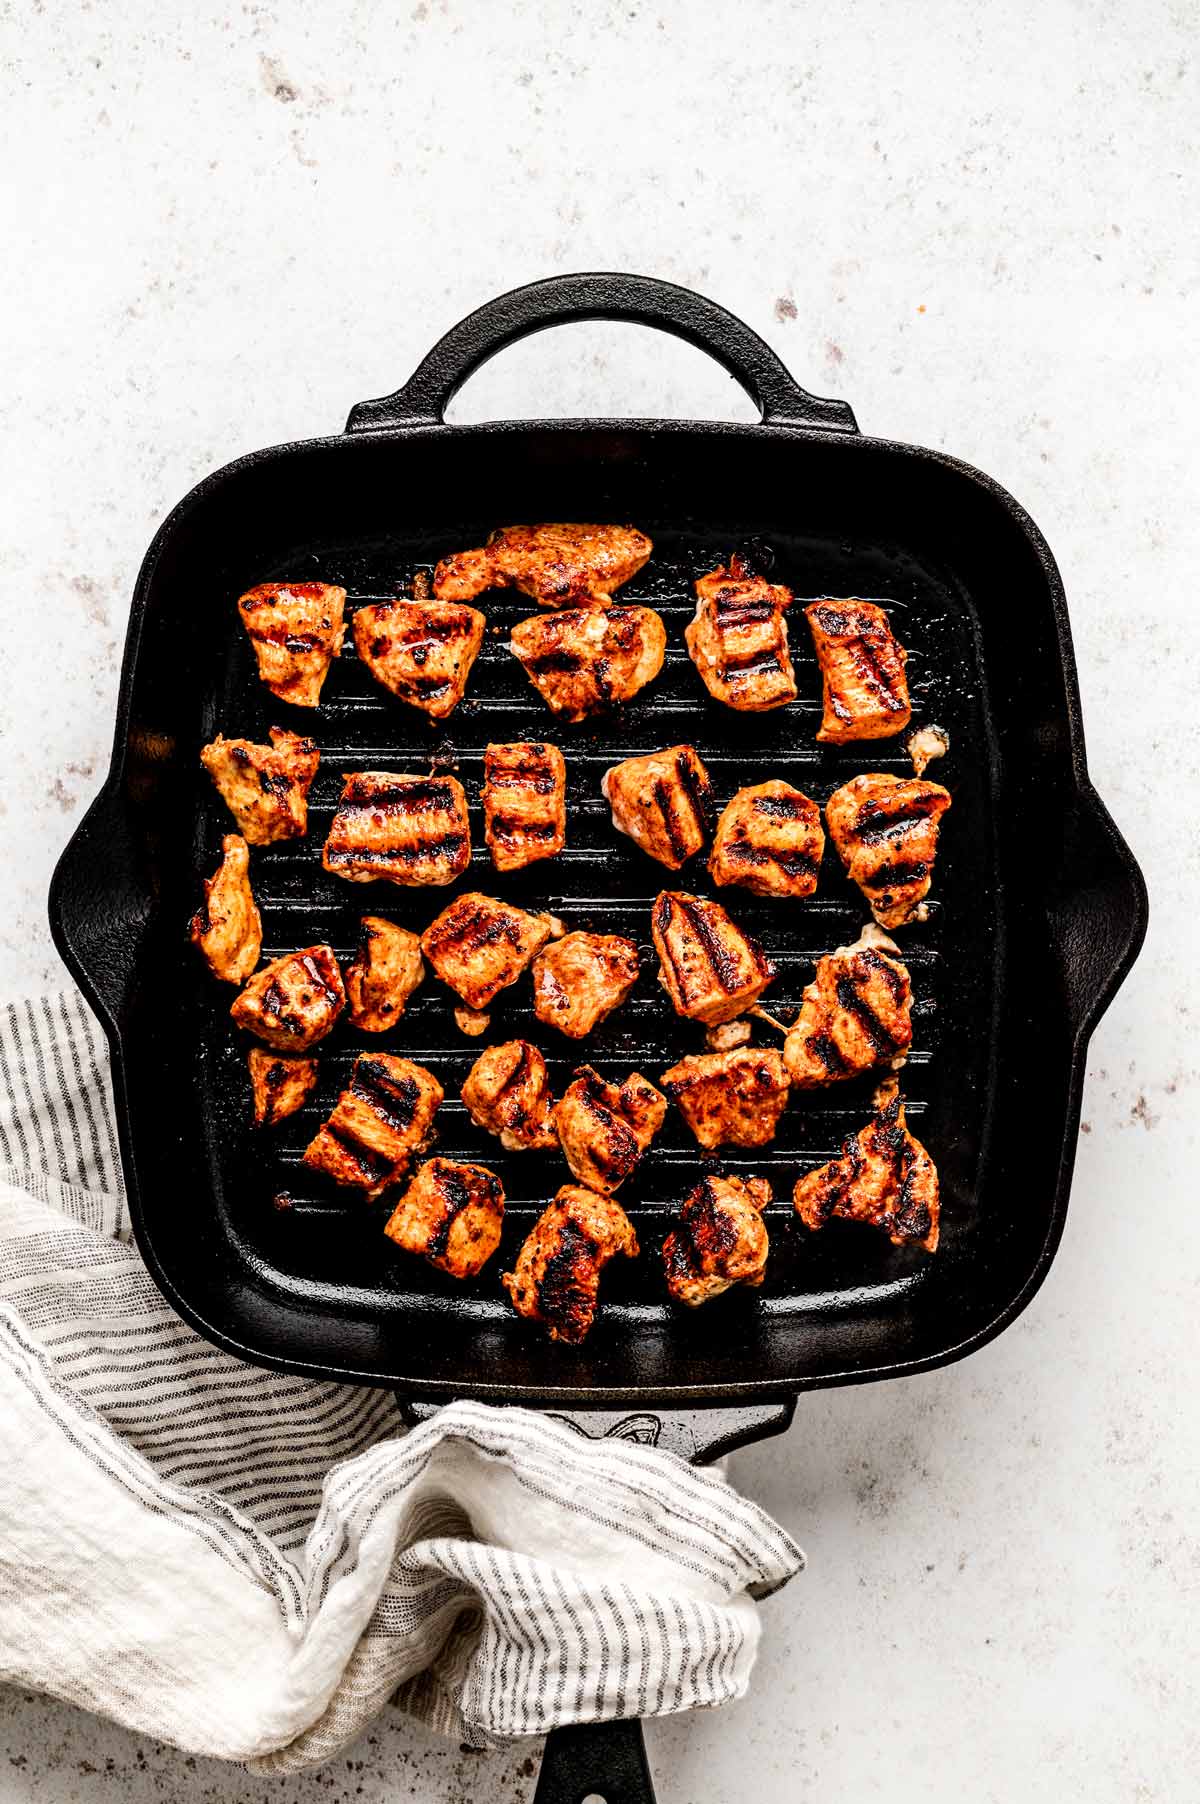 The chicken nuggets grilling in a grill pan.